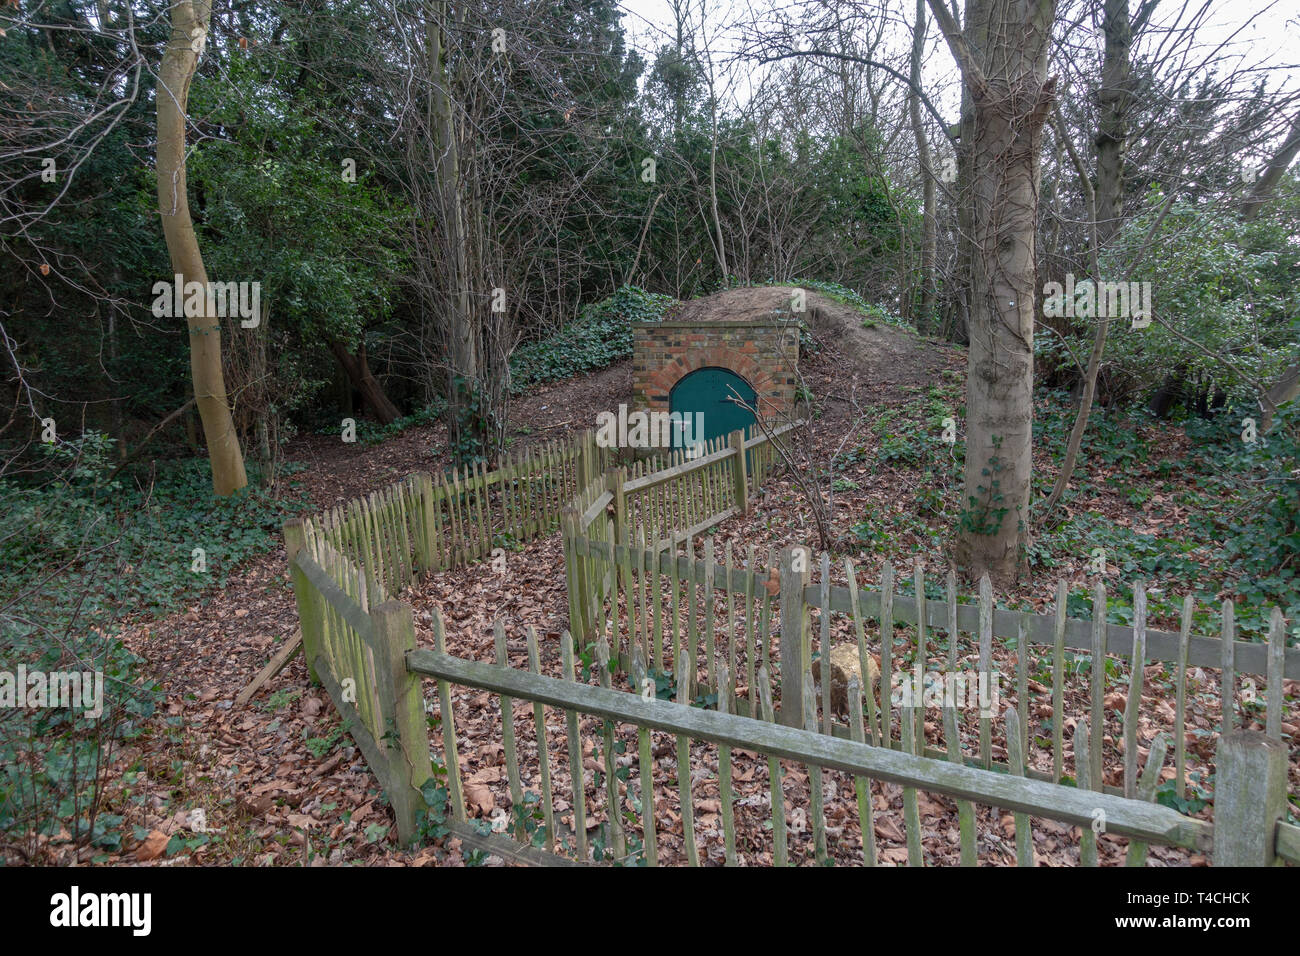 Ice house in the grounds of Marble Hill House, Marble Hill, Twickenham, London, UK. Stock Photo